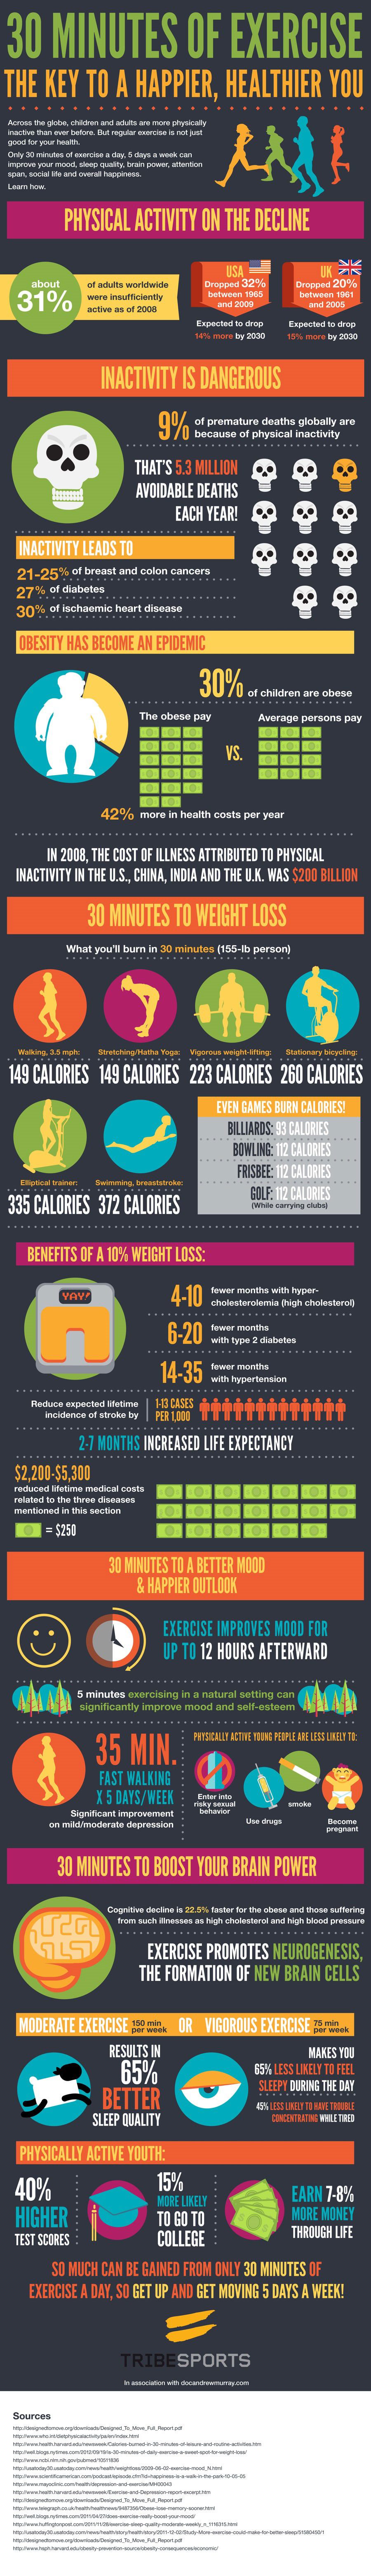 30 Minutes Of Exercise Infographic